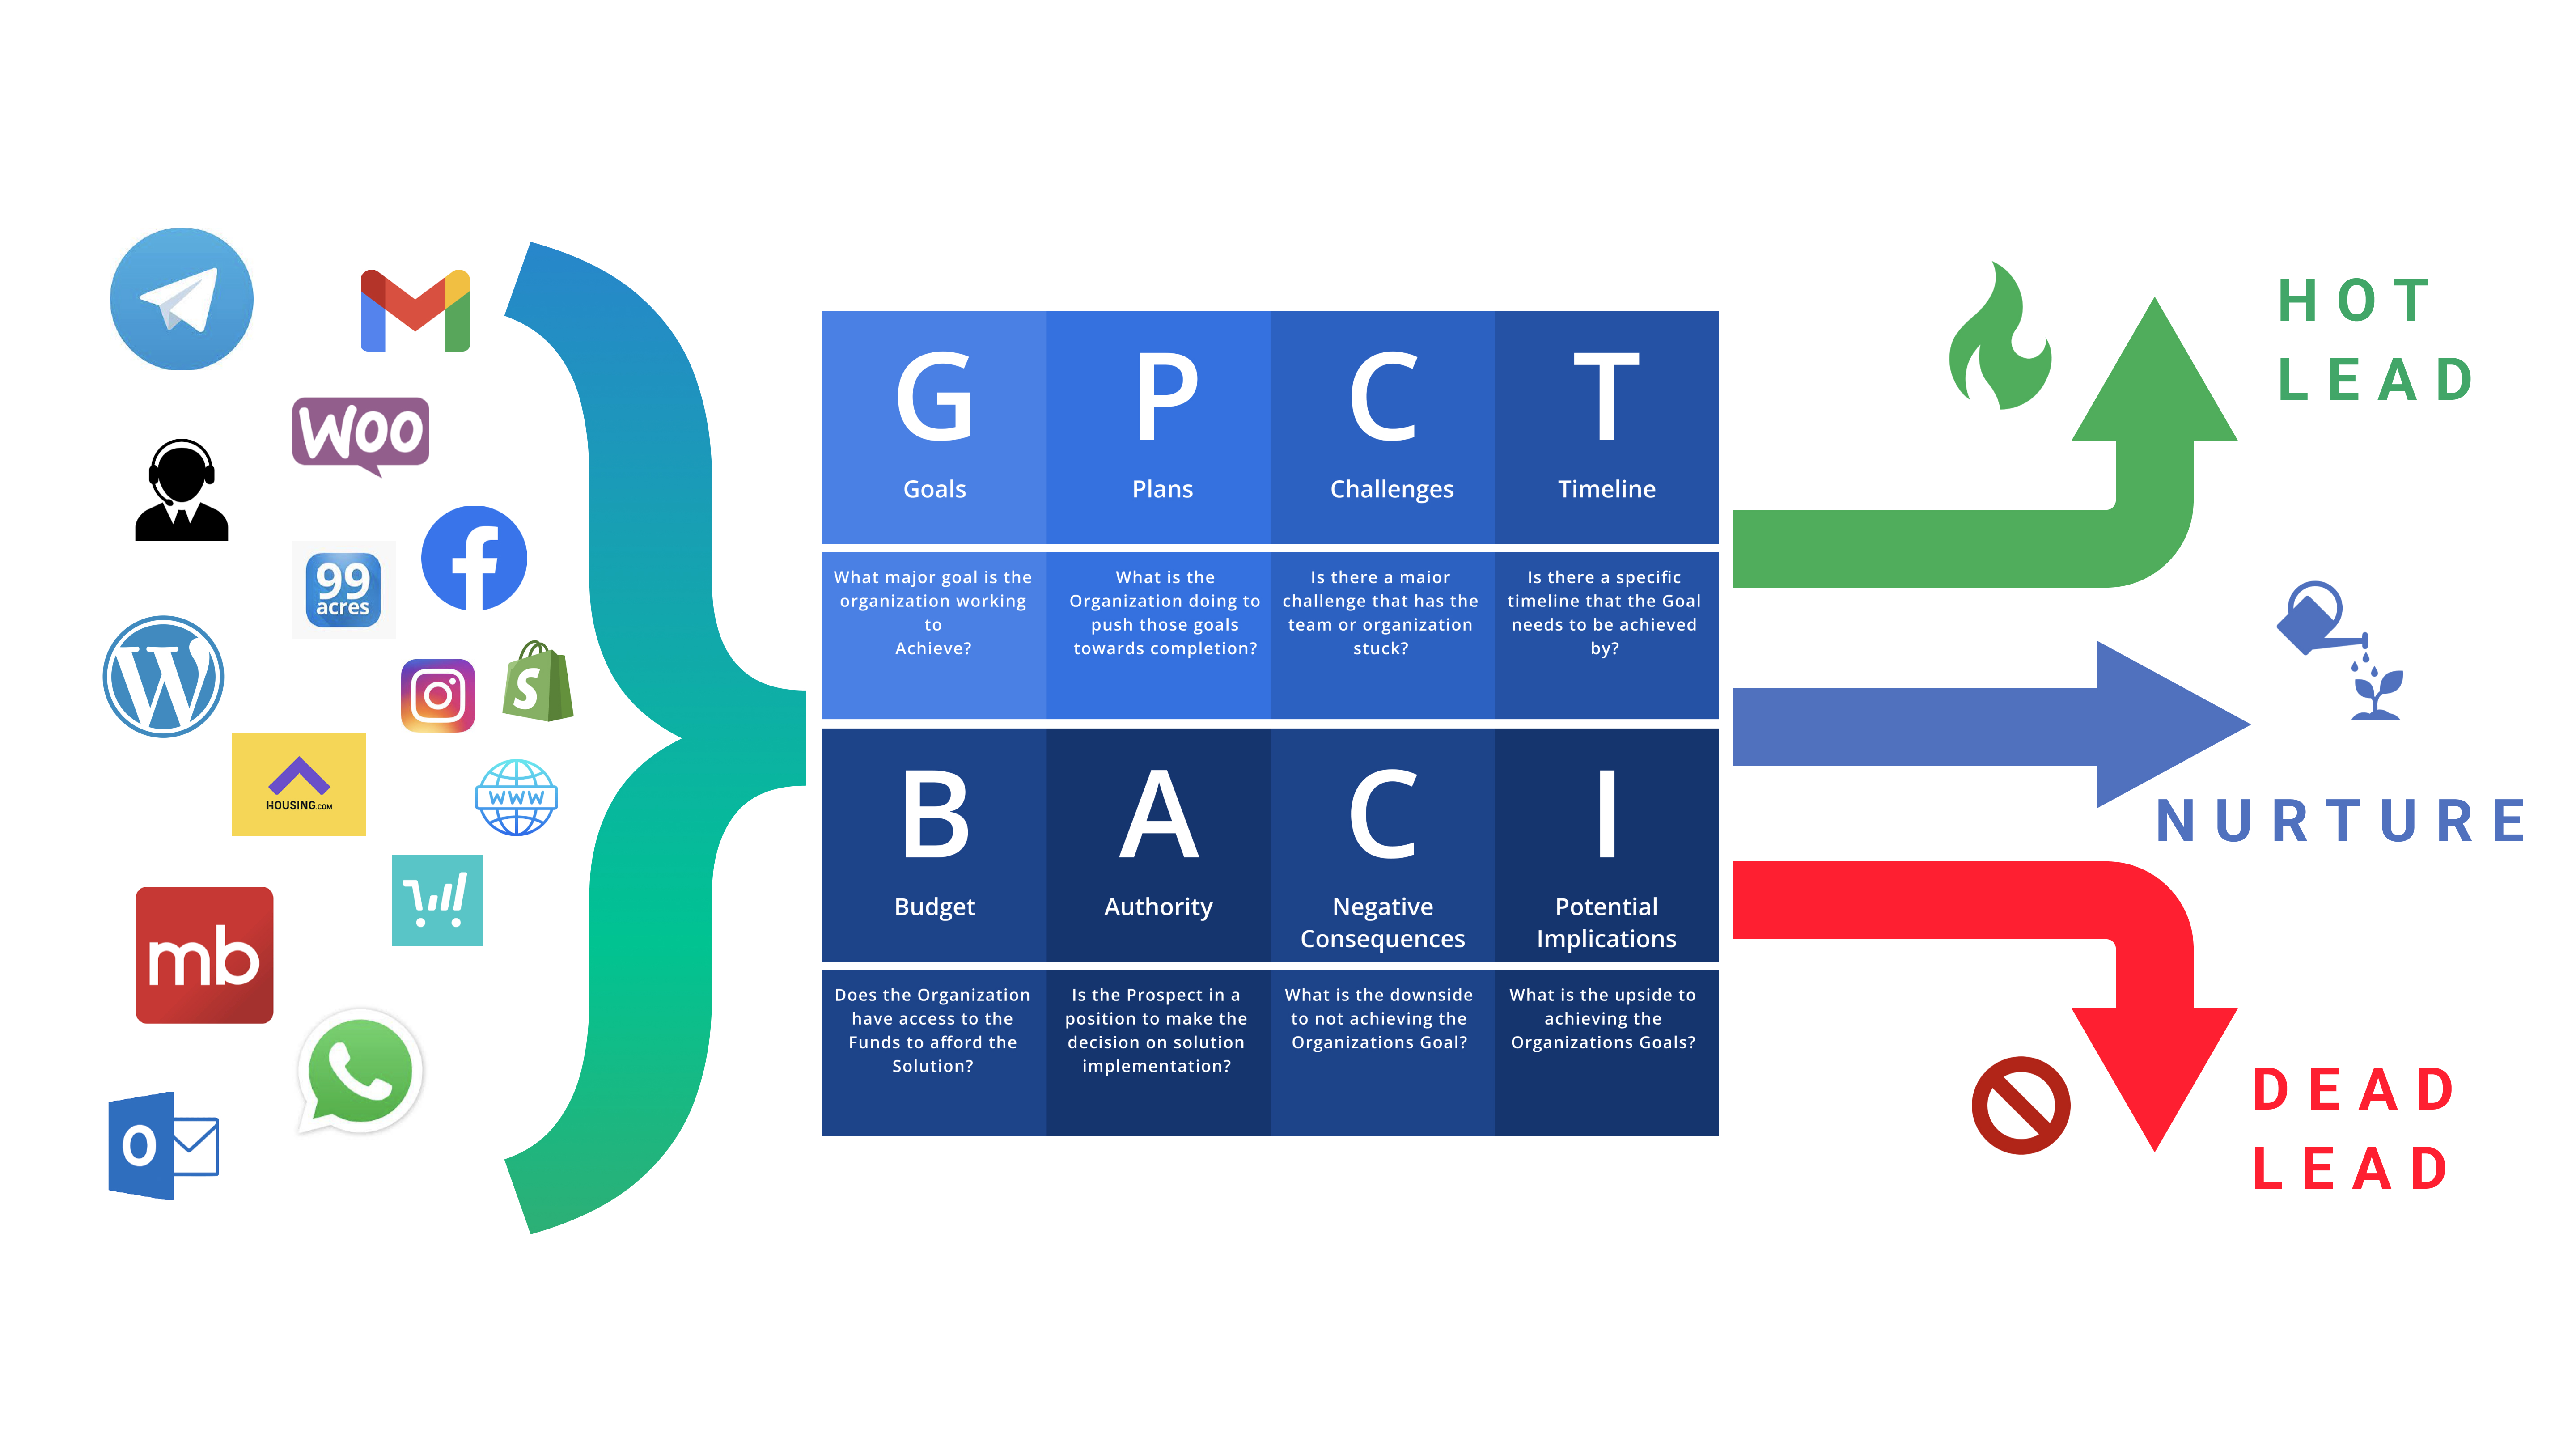 GPCTBA/C&I Framework to qualify leads- Goals, Plans, Challenges, Timeline, Budget, Authority,

                         Negative Consequences and Interest